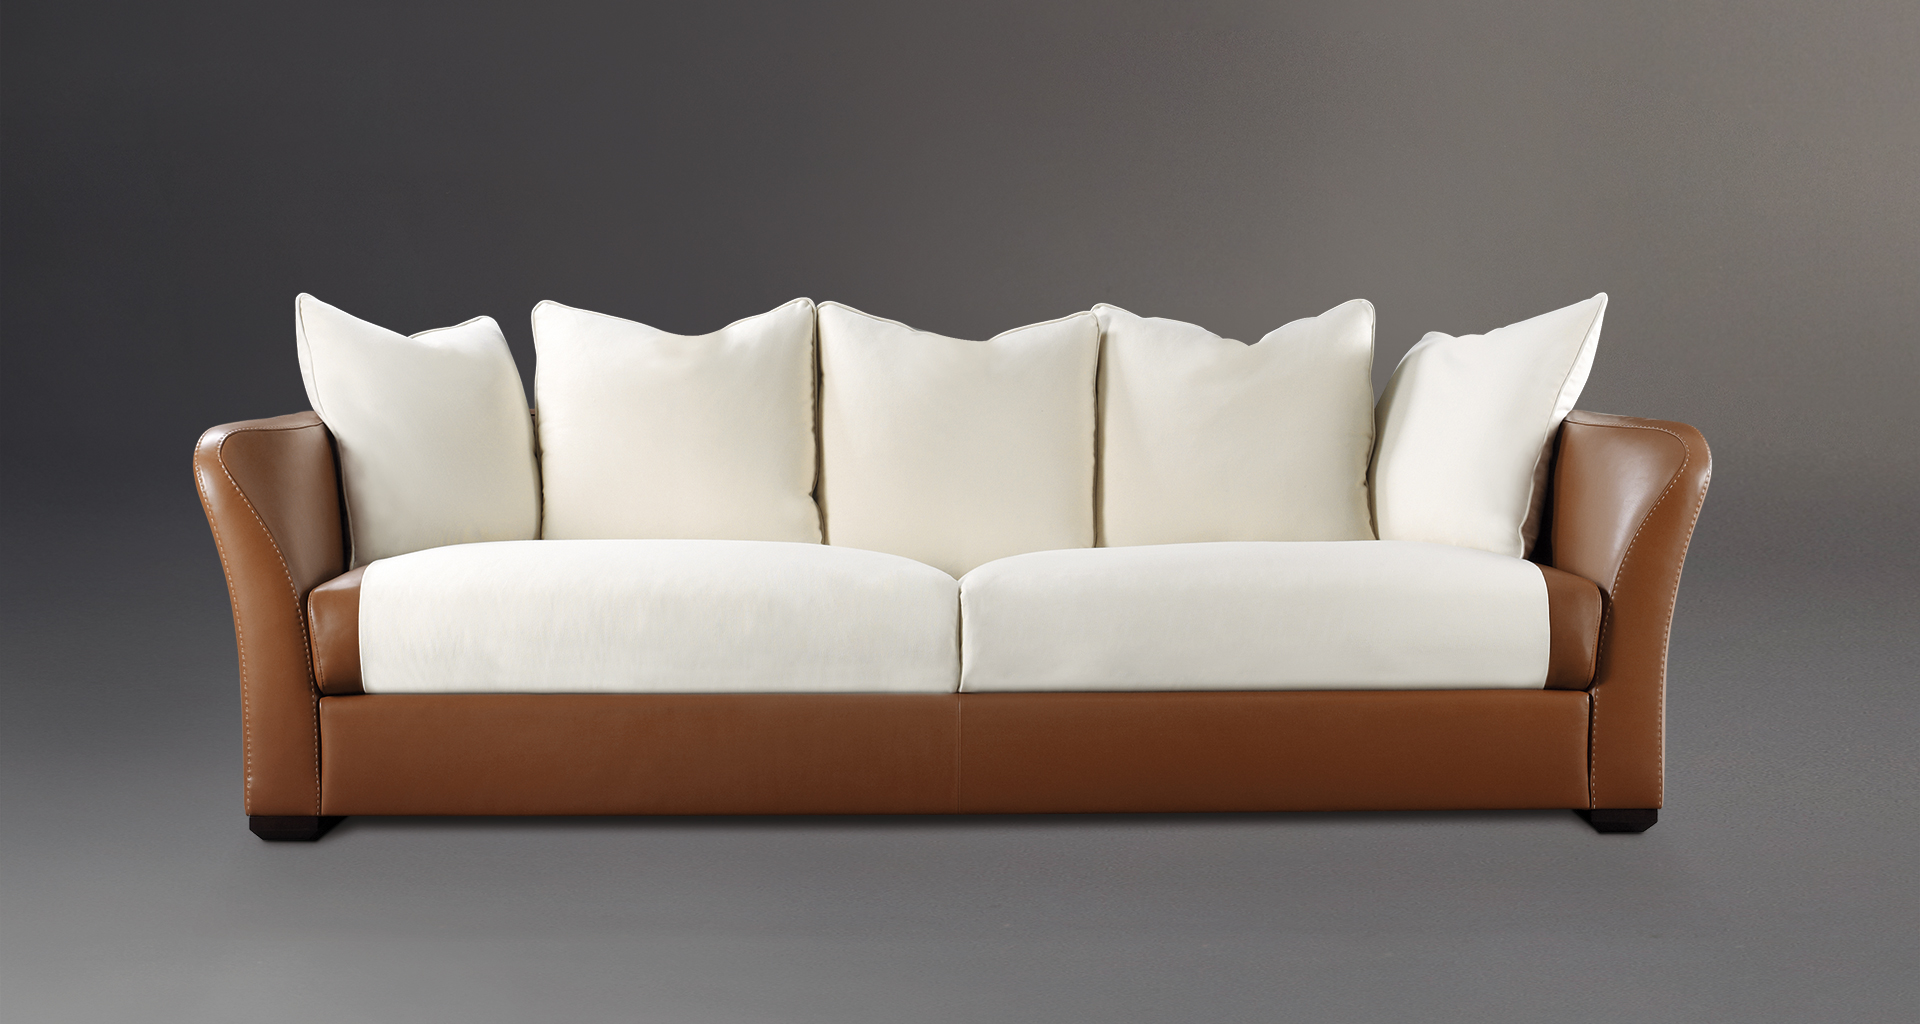 Shangri-la is a wooden sofa covered in leather and fabric, from Promemoria's catalogue | Promemoria